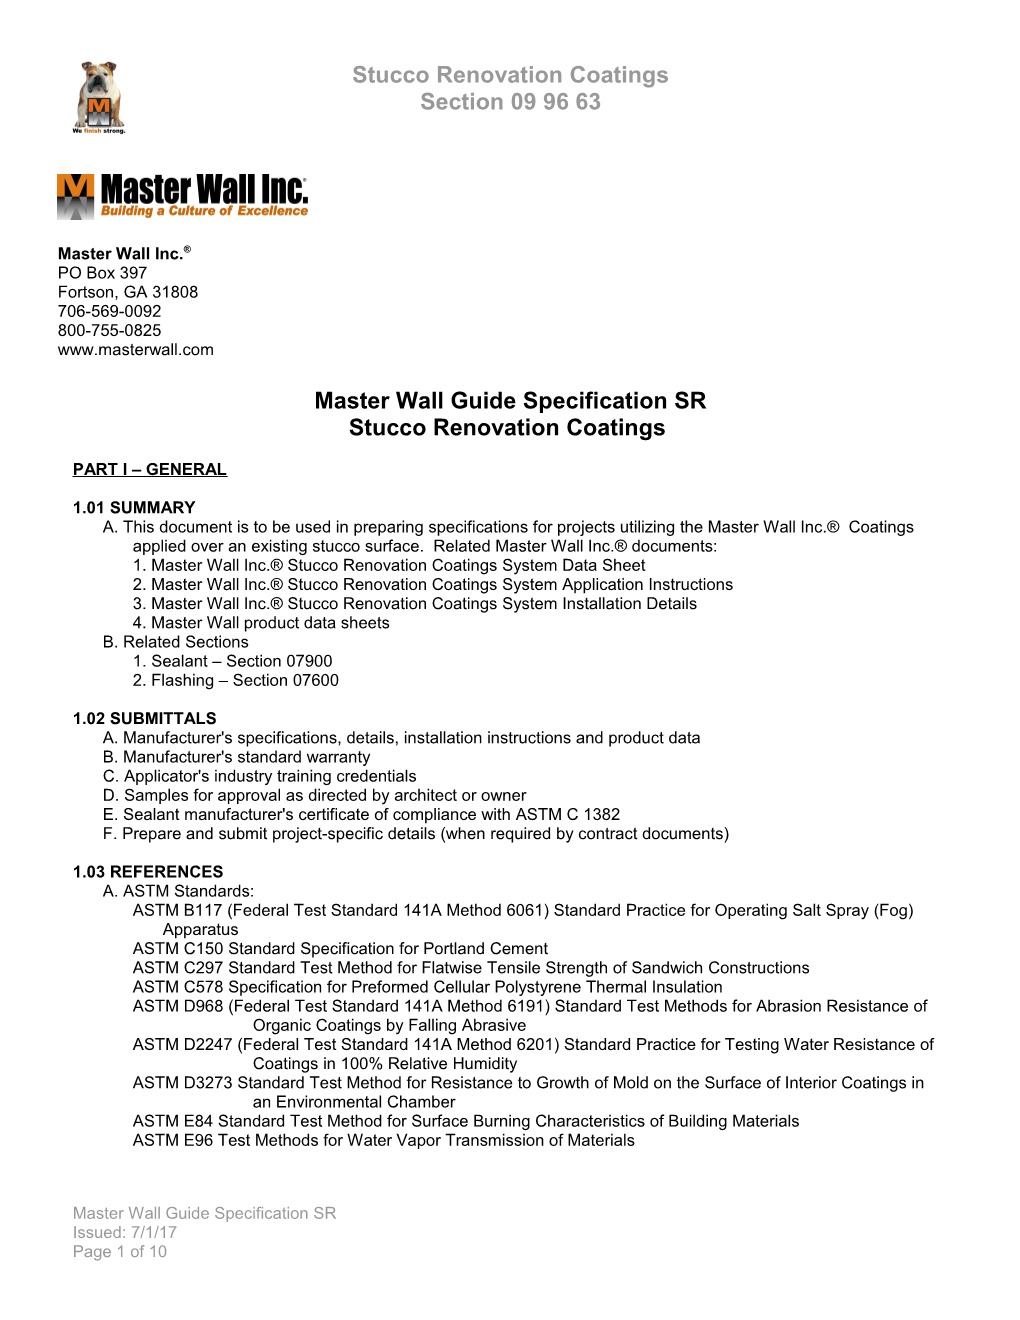 Master Wall Guide Specification SR